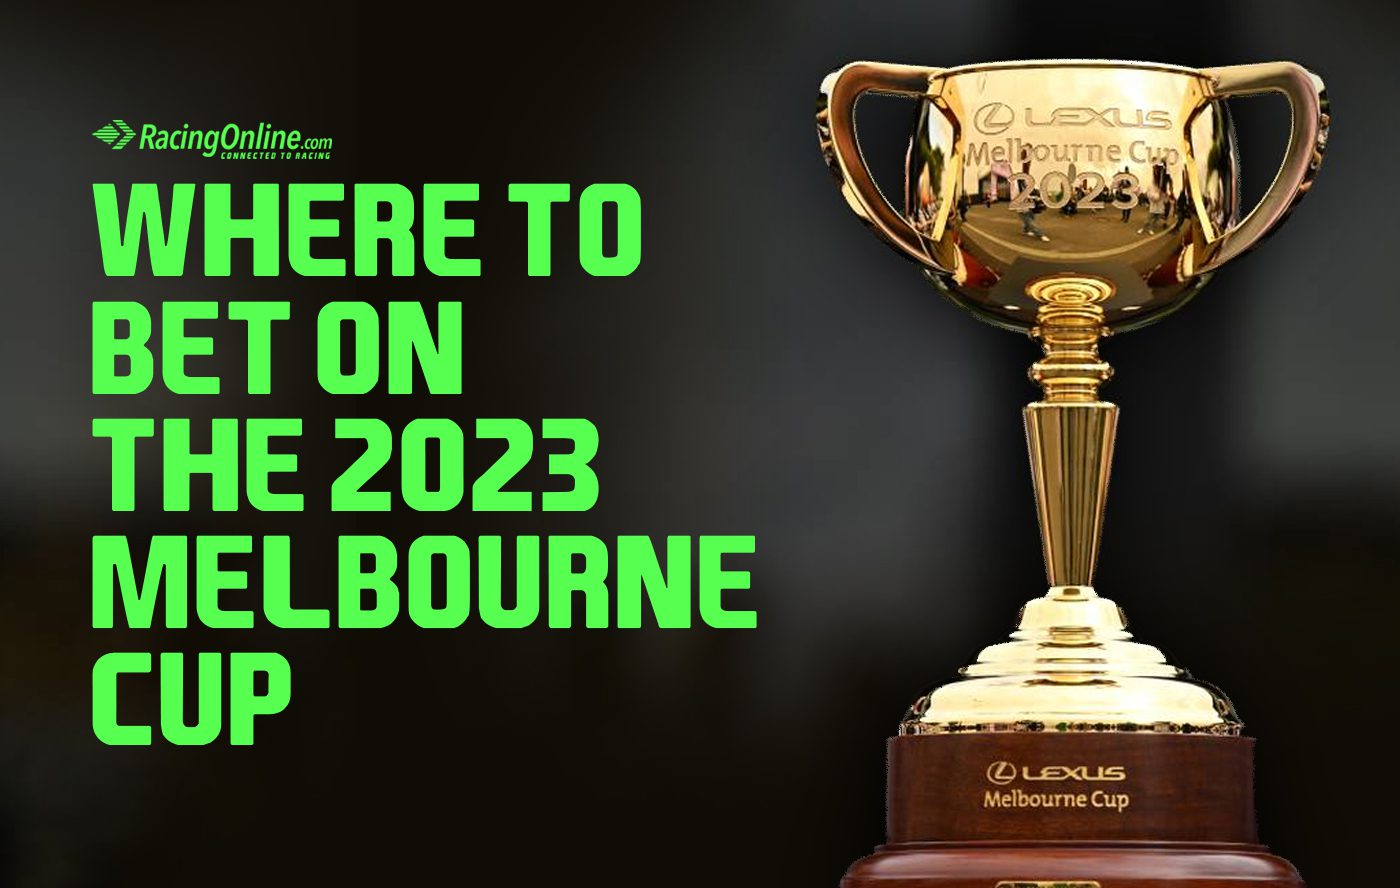 Where to bet on the 2023 Melbourne Cup